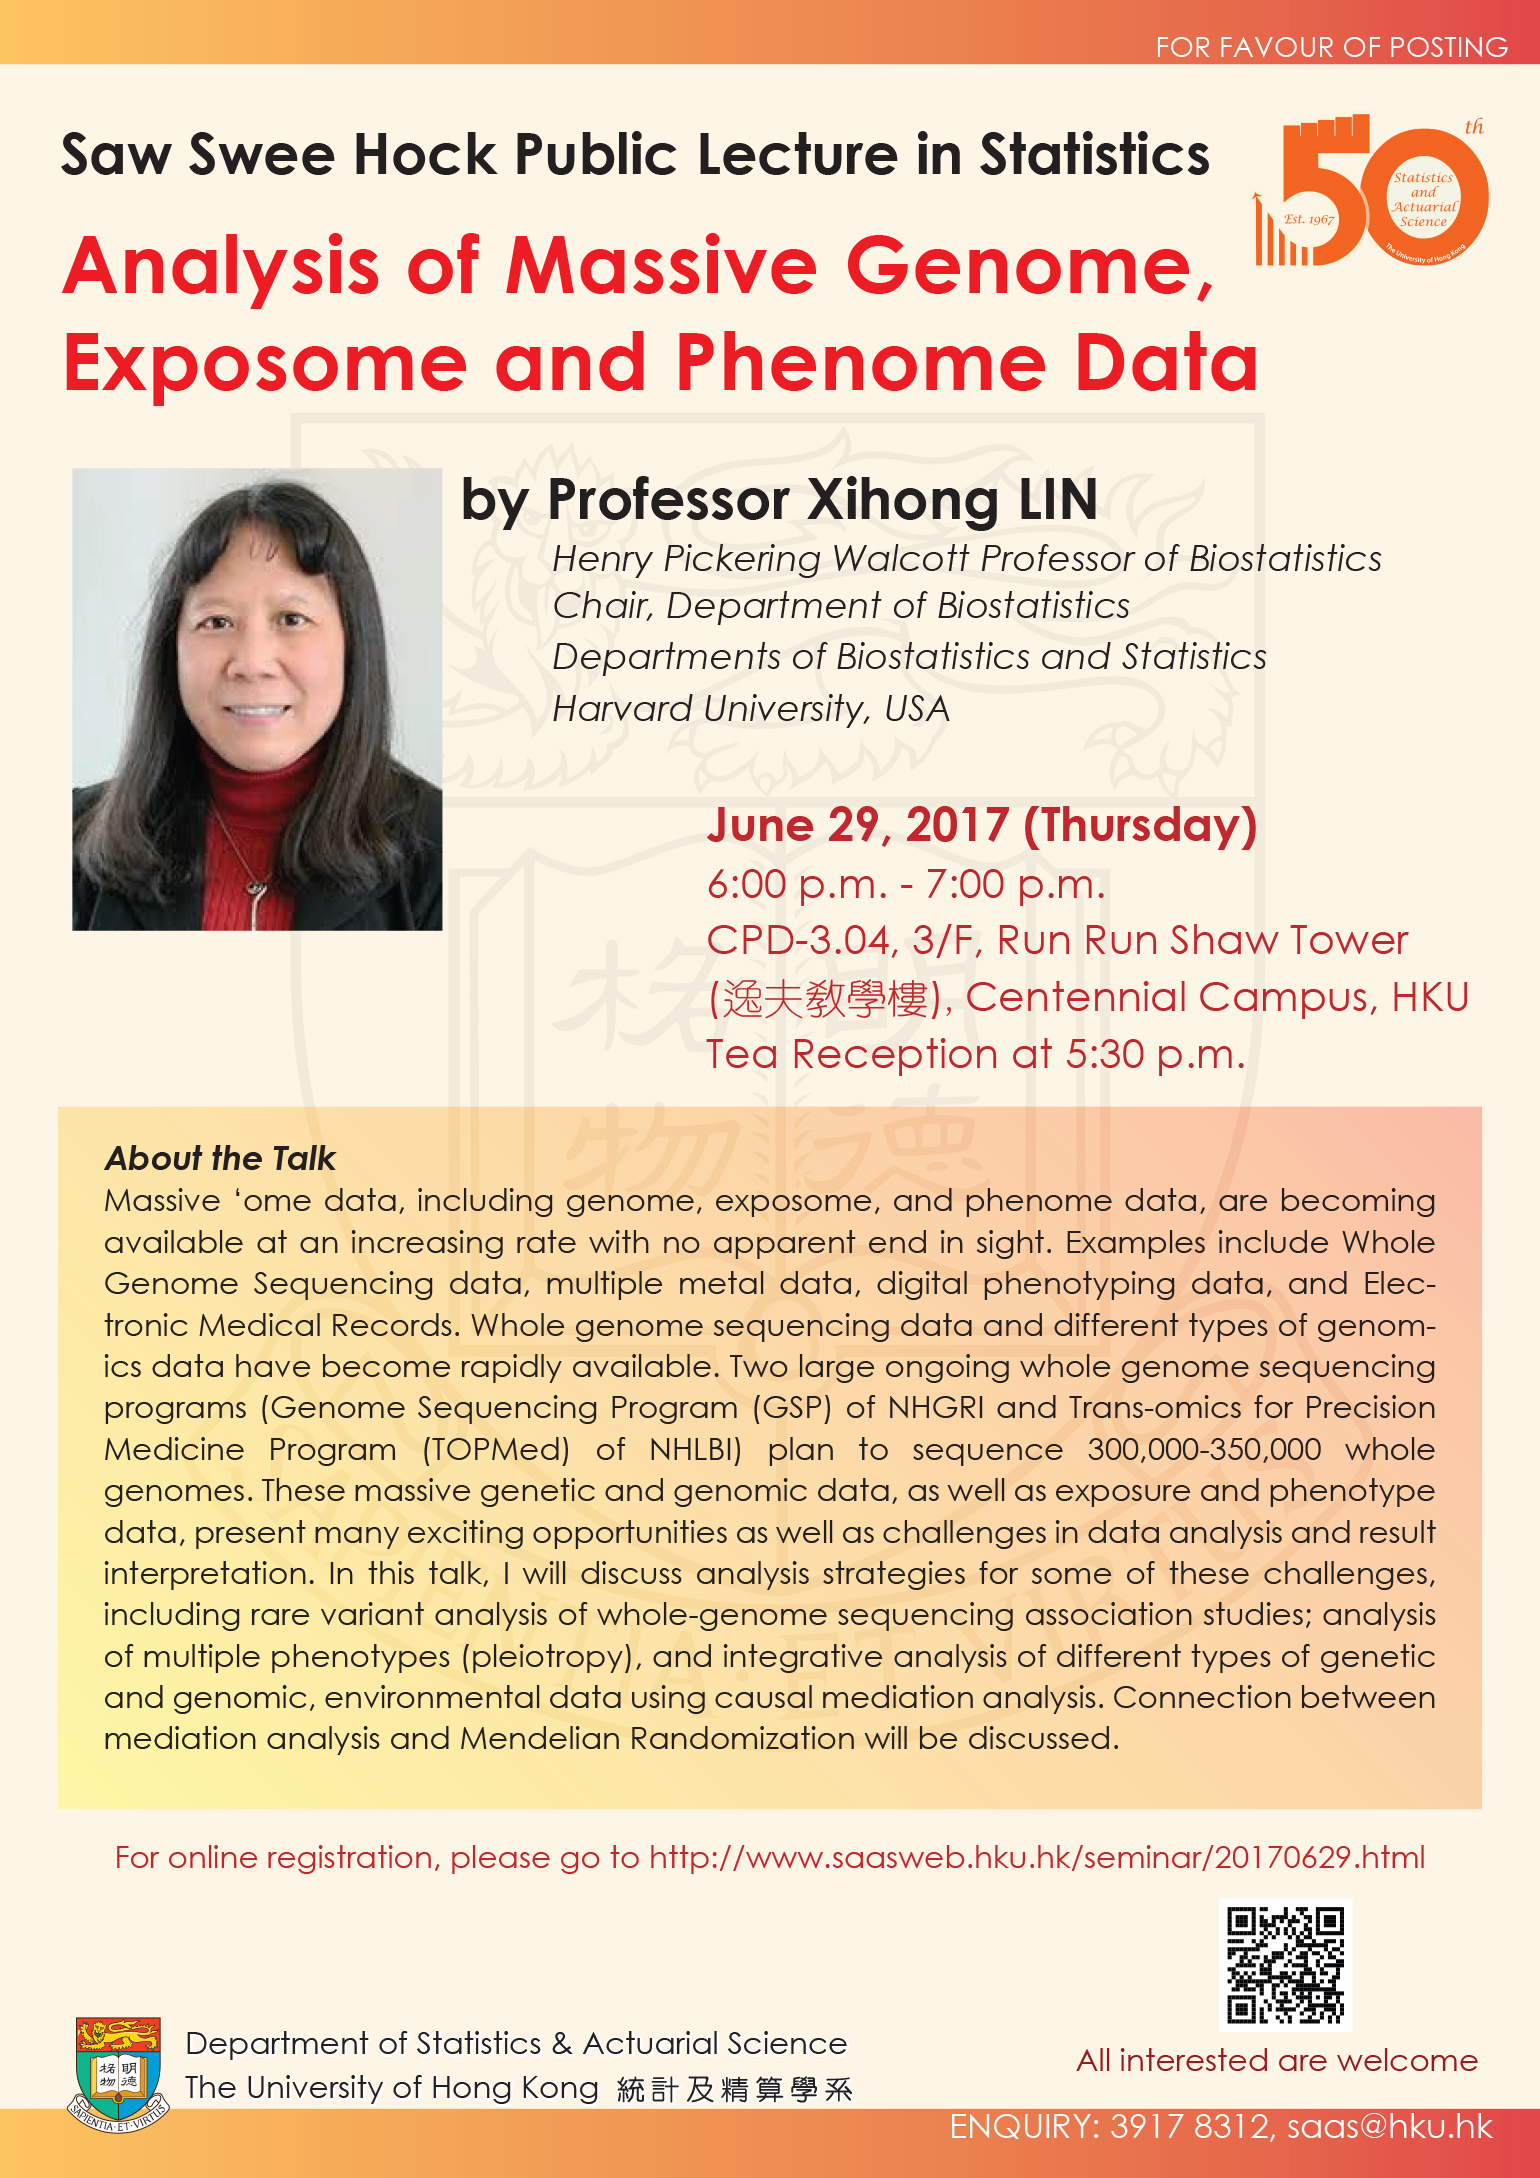 Saw Swee Hock Public Lecture in Statistics on 'Analysis of Massive Genome, Exposome & Phenome Data' by Professor Xihong LIN